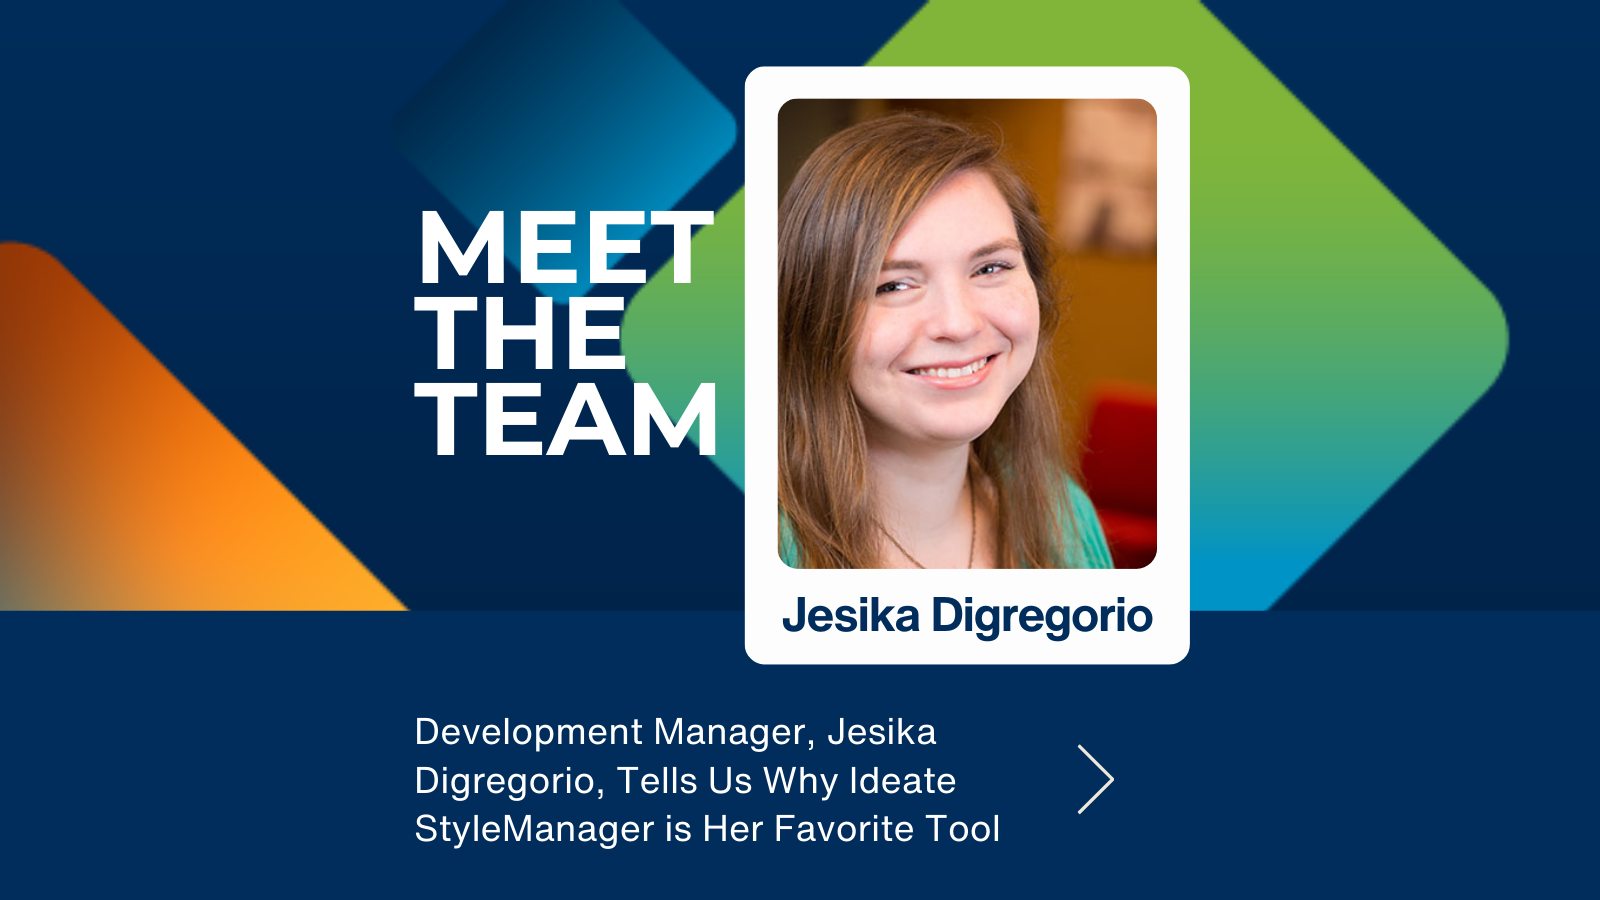 Meet Jessica Digregorio and learn why Ideate StyleManager is her favorite Ideate Software tool